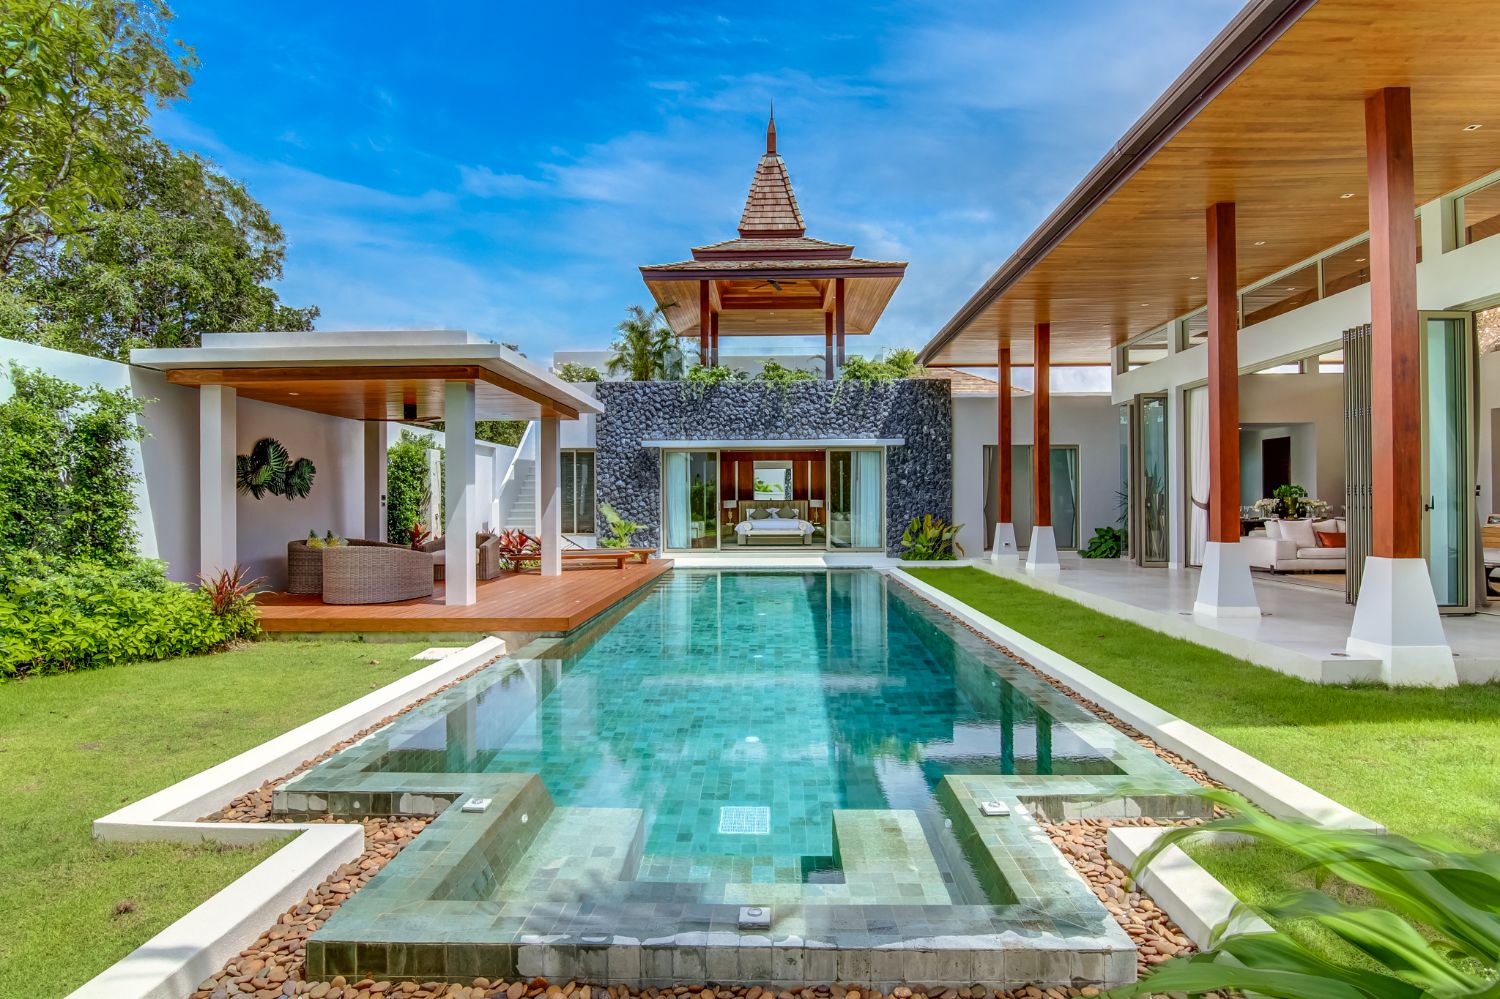 ✨The Tropical Modern Balinese Luxury Private Pool Villa by the Forest✨